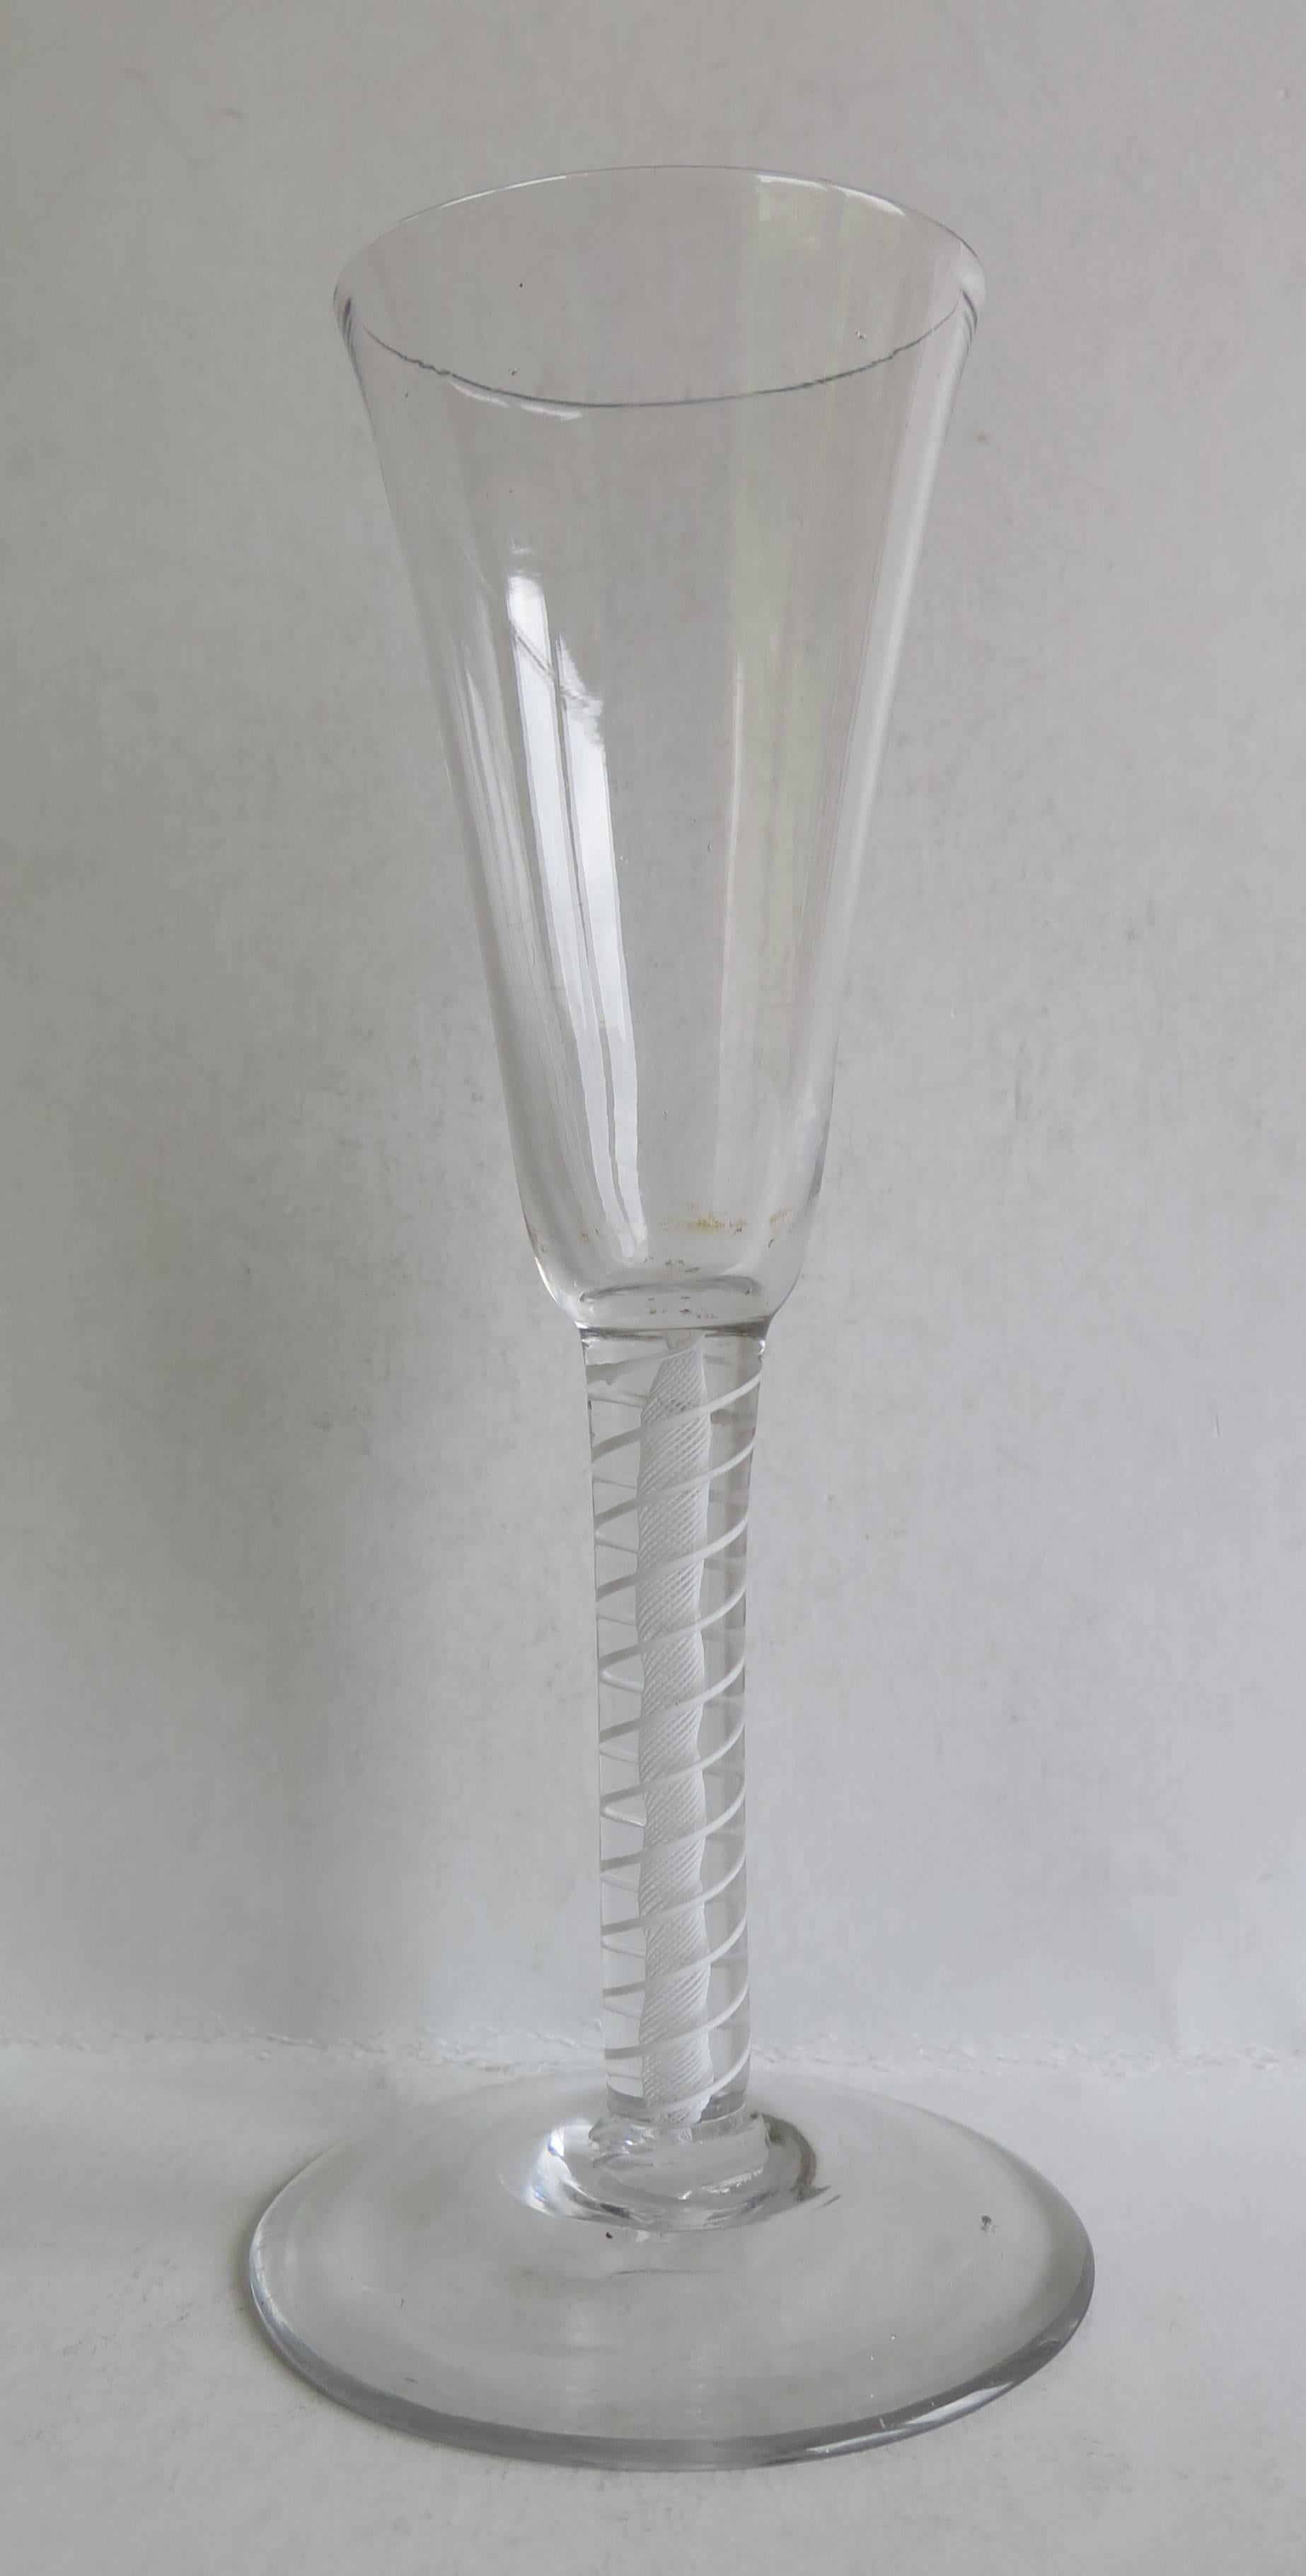 This is a good handblown, English, mid-Georgian, Ale drinking glass with a double series opaque twist (DSOT) stem, dating from the middle of the 18th century, circa 1765. These tall ale glasses are now used as Wine flutes.

These glasses are very